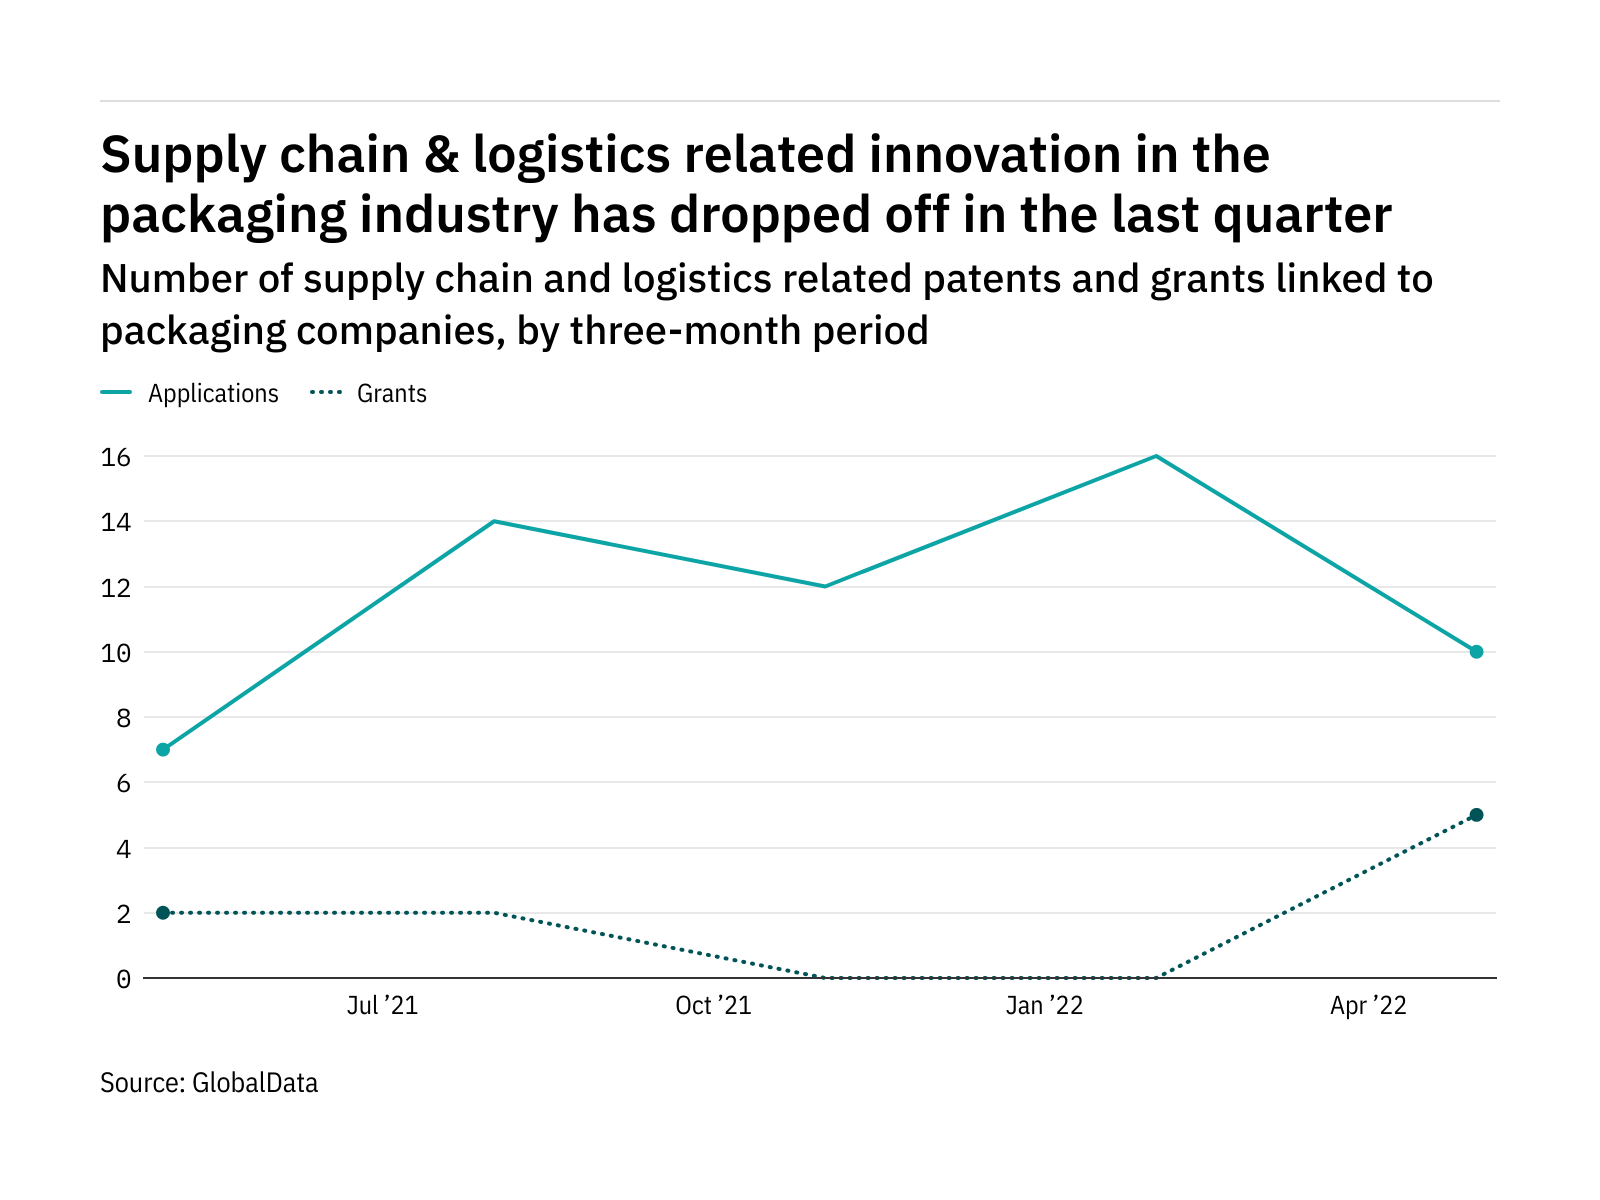 Supply chain & logistics innovation among packaging industry companies dropped off in the last quarter